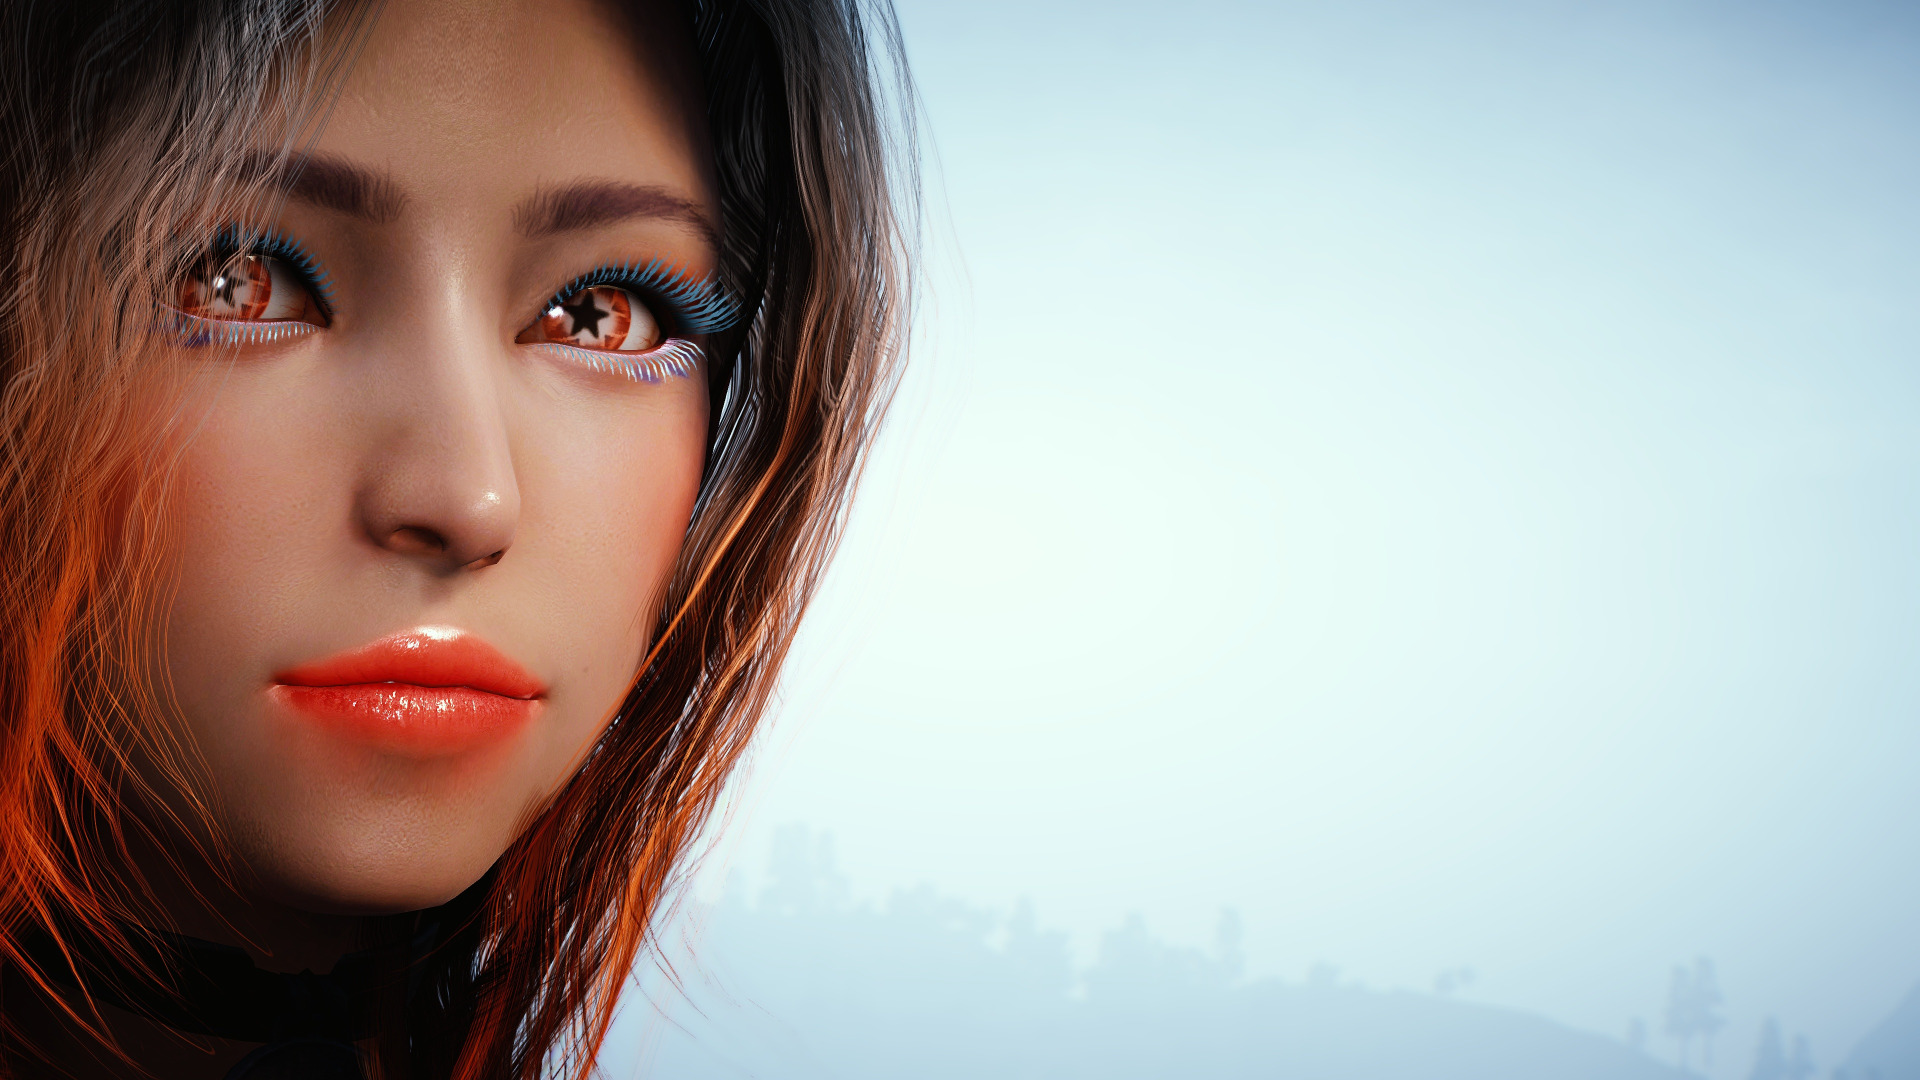 Download Wallpaper Eyes Girl Face Section Rendering In Resolution 1920x1080 